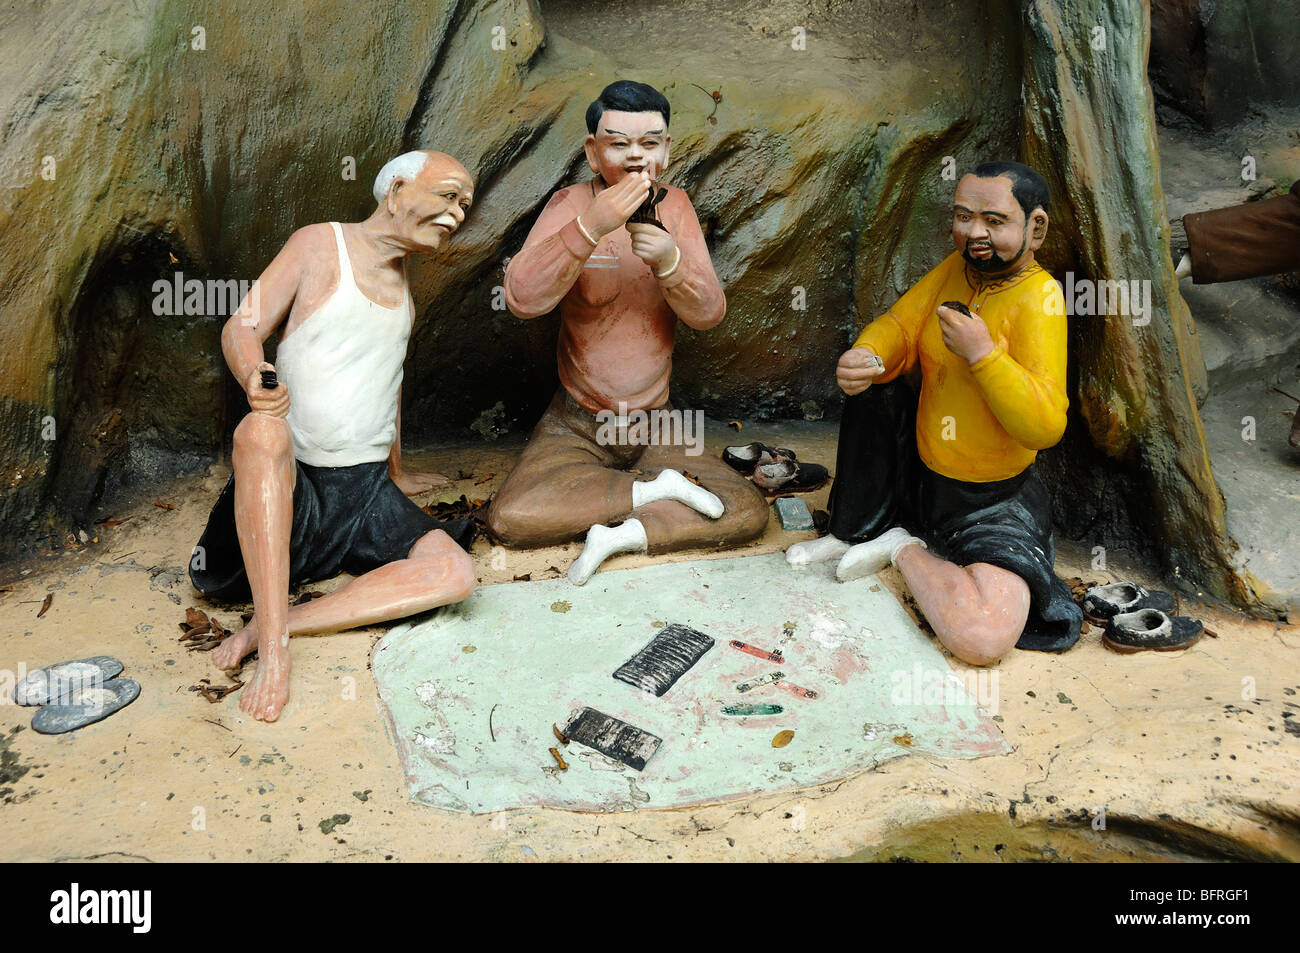 Chinese Gamblers Playing Mahjong or Gambling Scene, 'Gambling Can Cost You Everything' Morality Tale, Tiger Balm Gardens Chinese Theme Park,Singapore Stock Photo